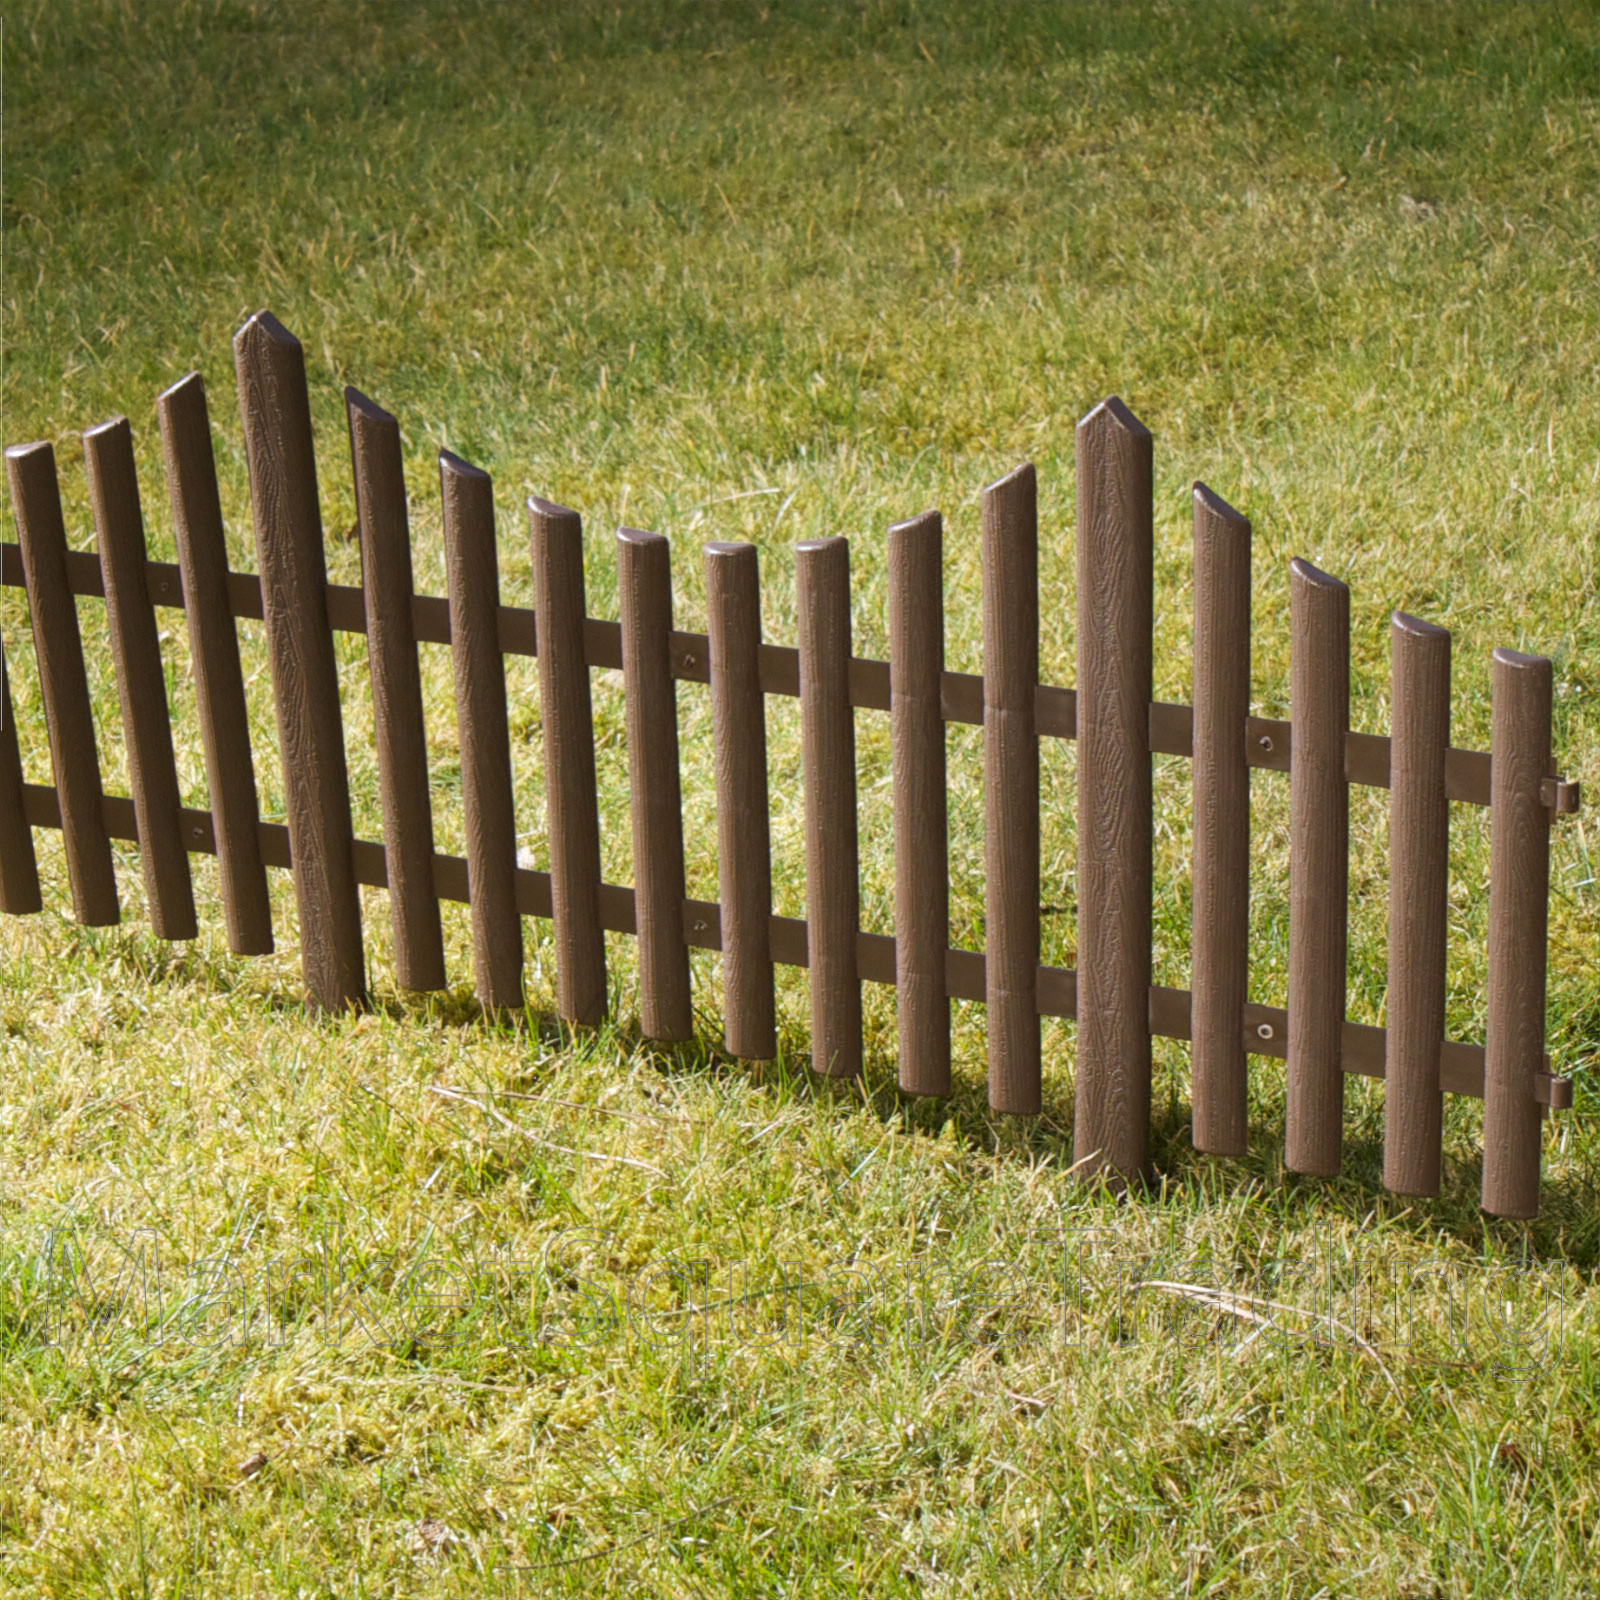 Landscape Fence Edging
 PLASTIC FENCING LAWN GRASS BORDER PATH EDGING FANCY SMALL